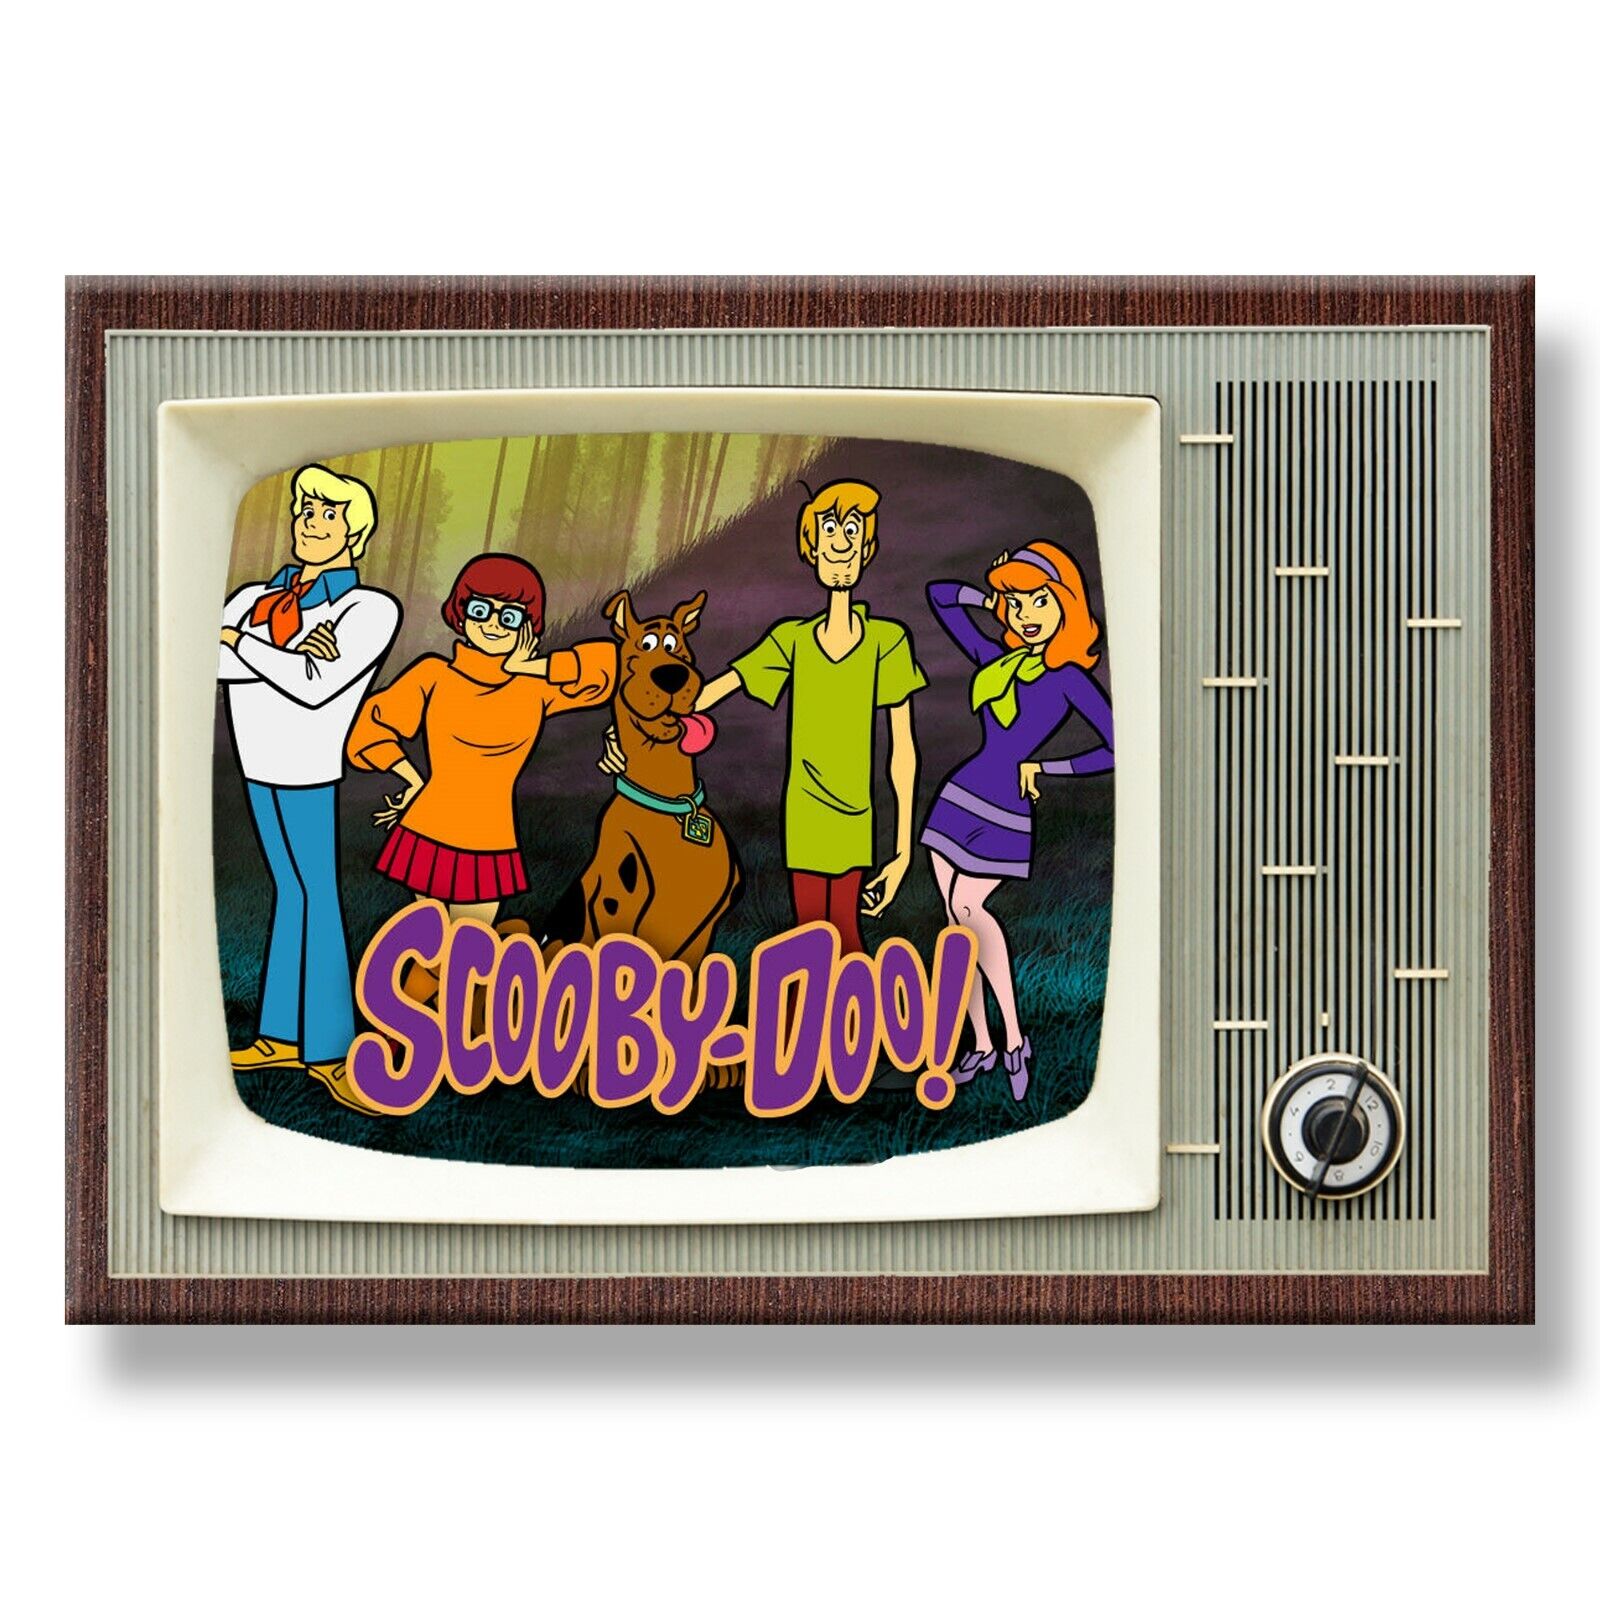 SCOOBY DOO Classic TV 3.5 inches x 2.5 inches Steel Cased FRIDGE MAGNET